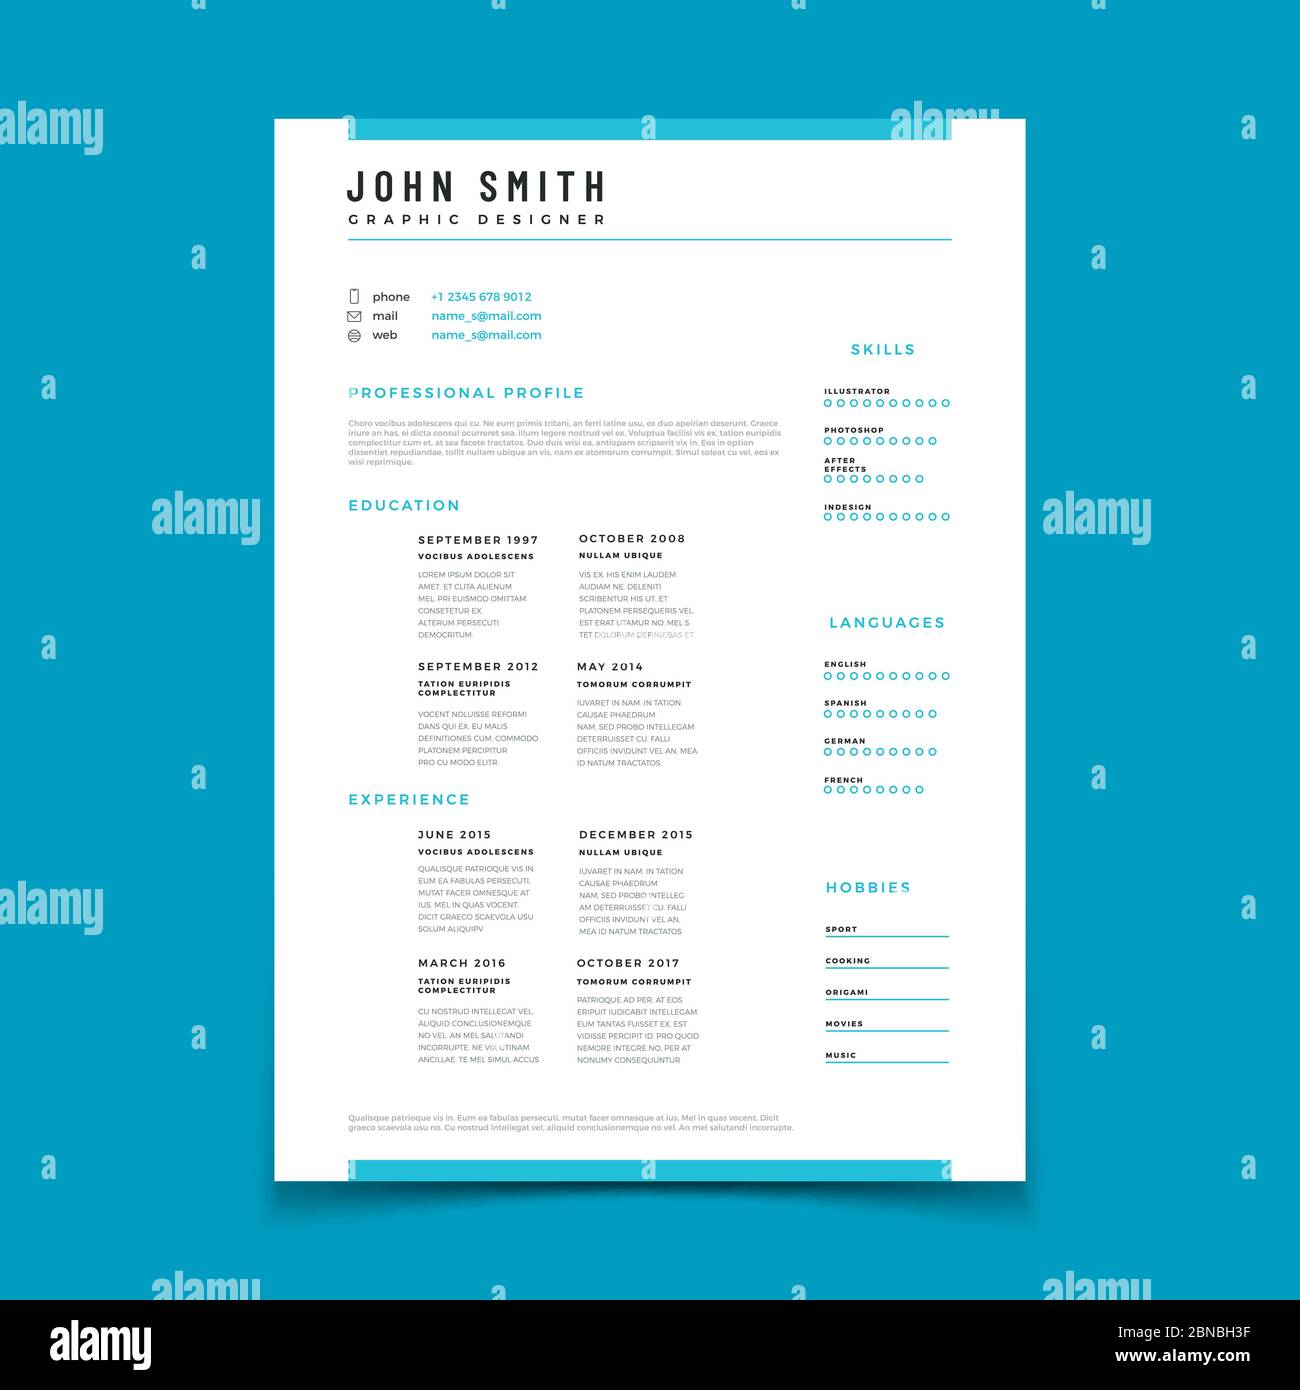 Cv personal profile. Resume curriculum vitae timeline data. Design vector web template. Personal page cv with timeline layout and data profile illustration Stock Vector